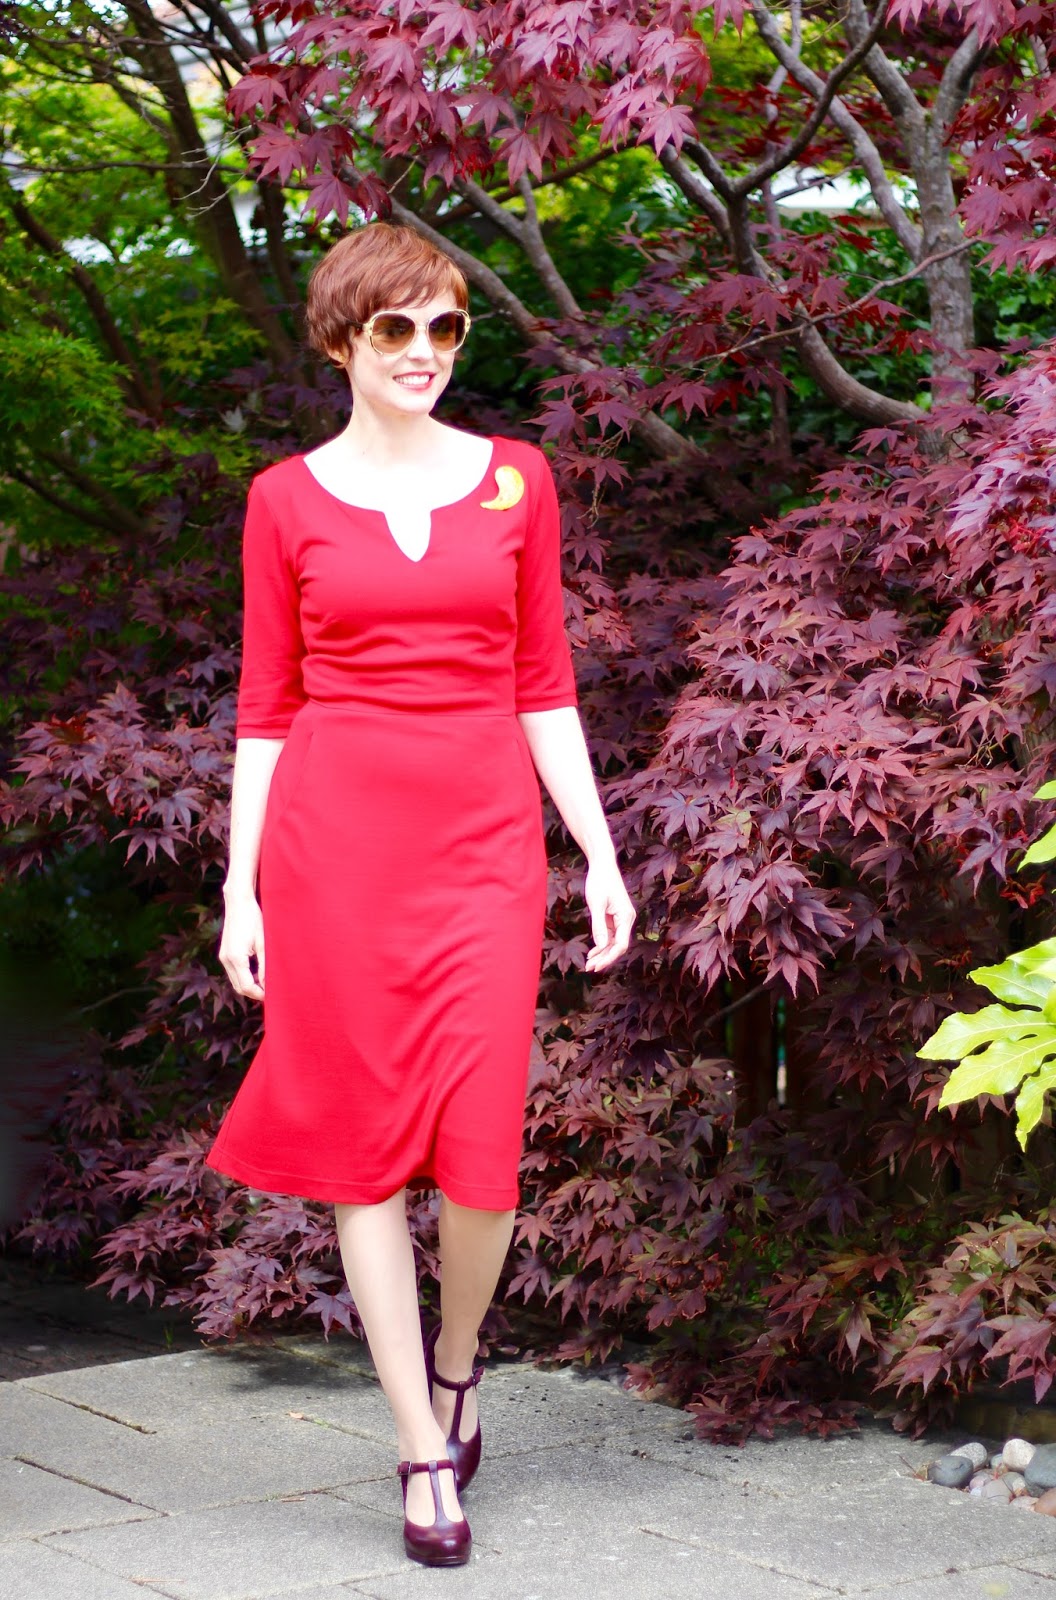 Red Alie Street Morgan Dress | 3 ways to add Individuality to a Formal Look.